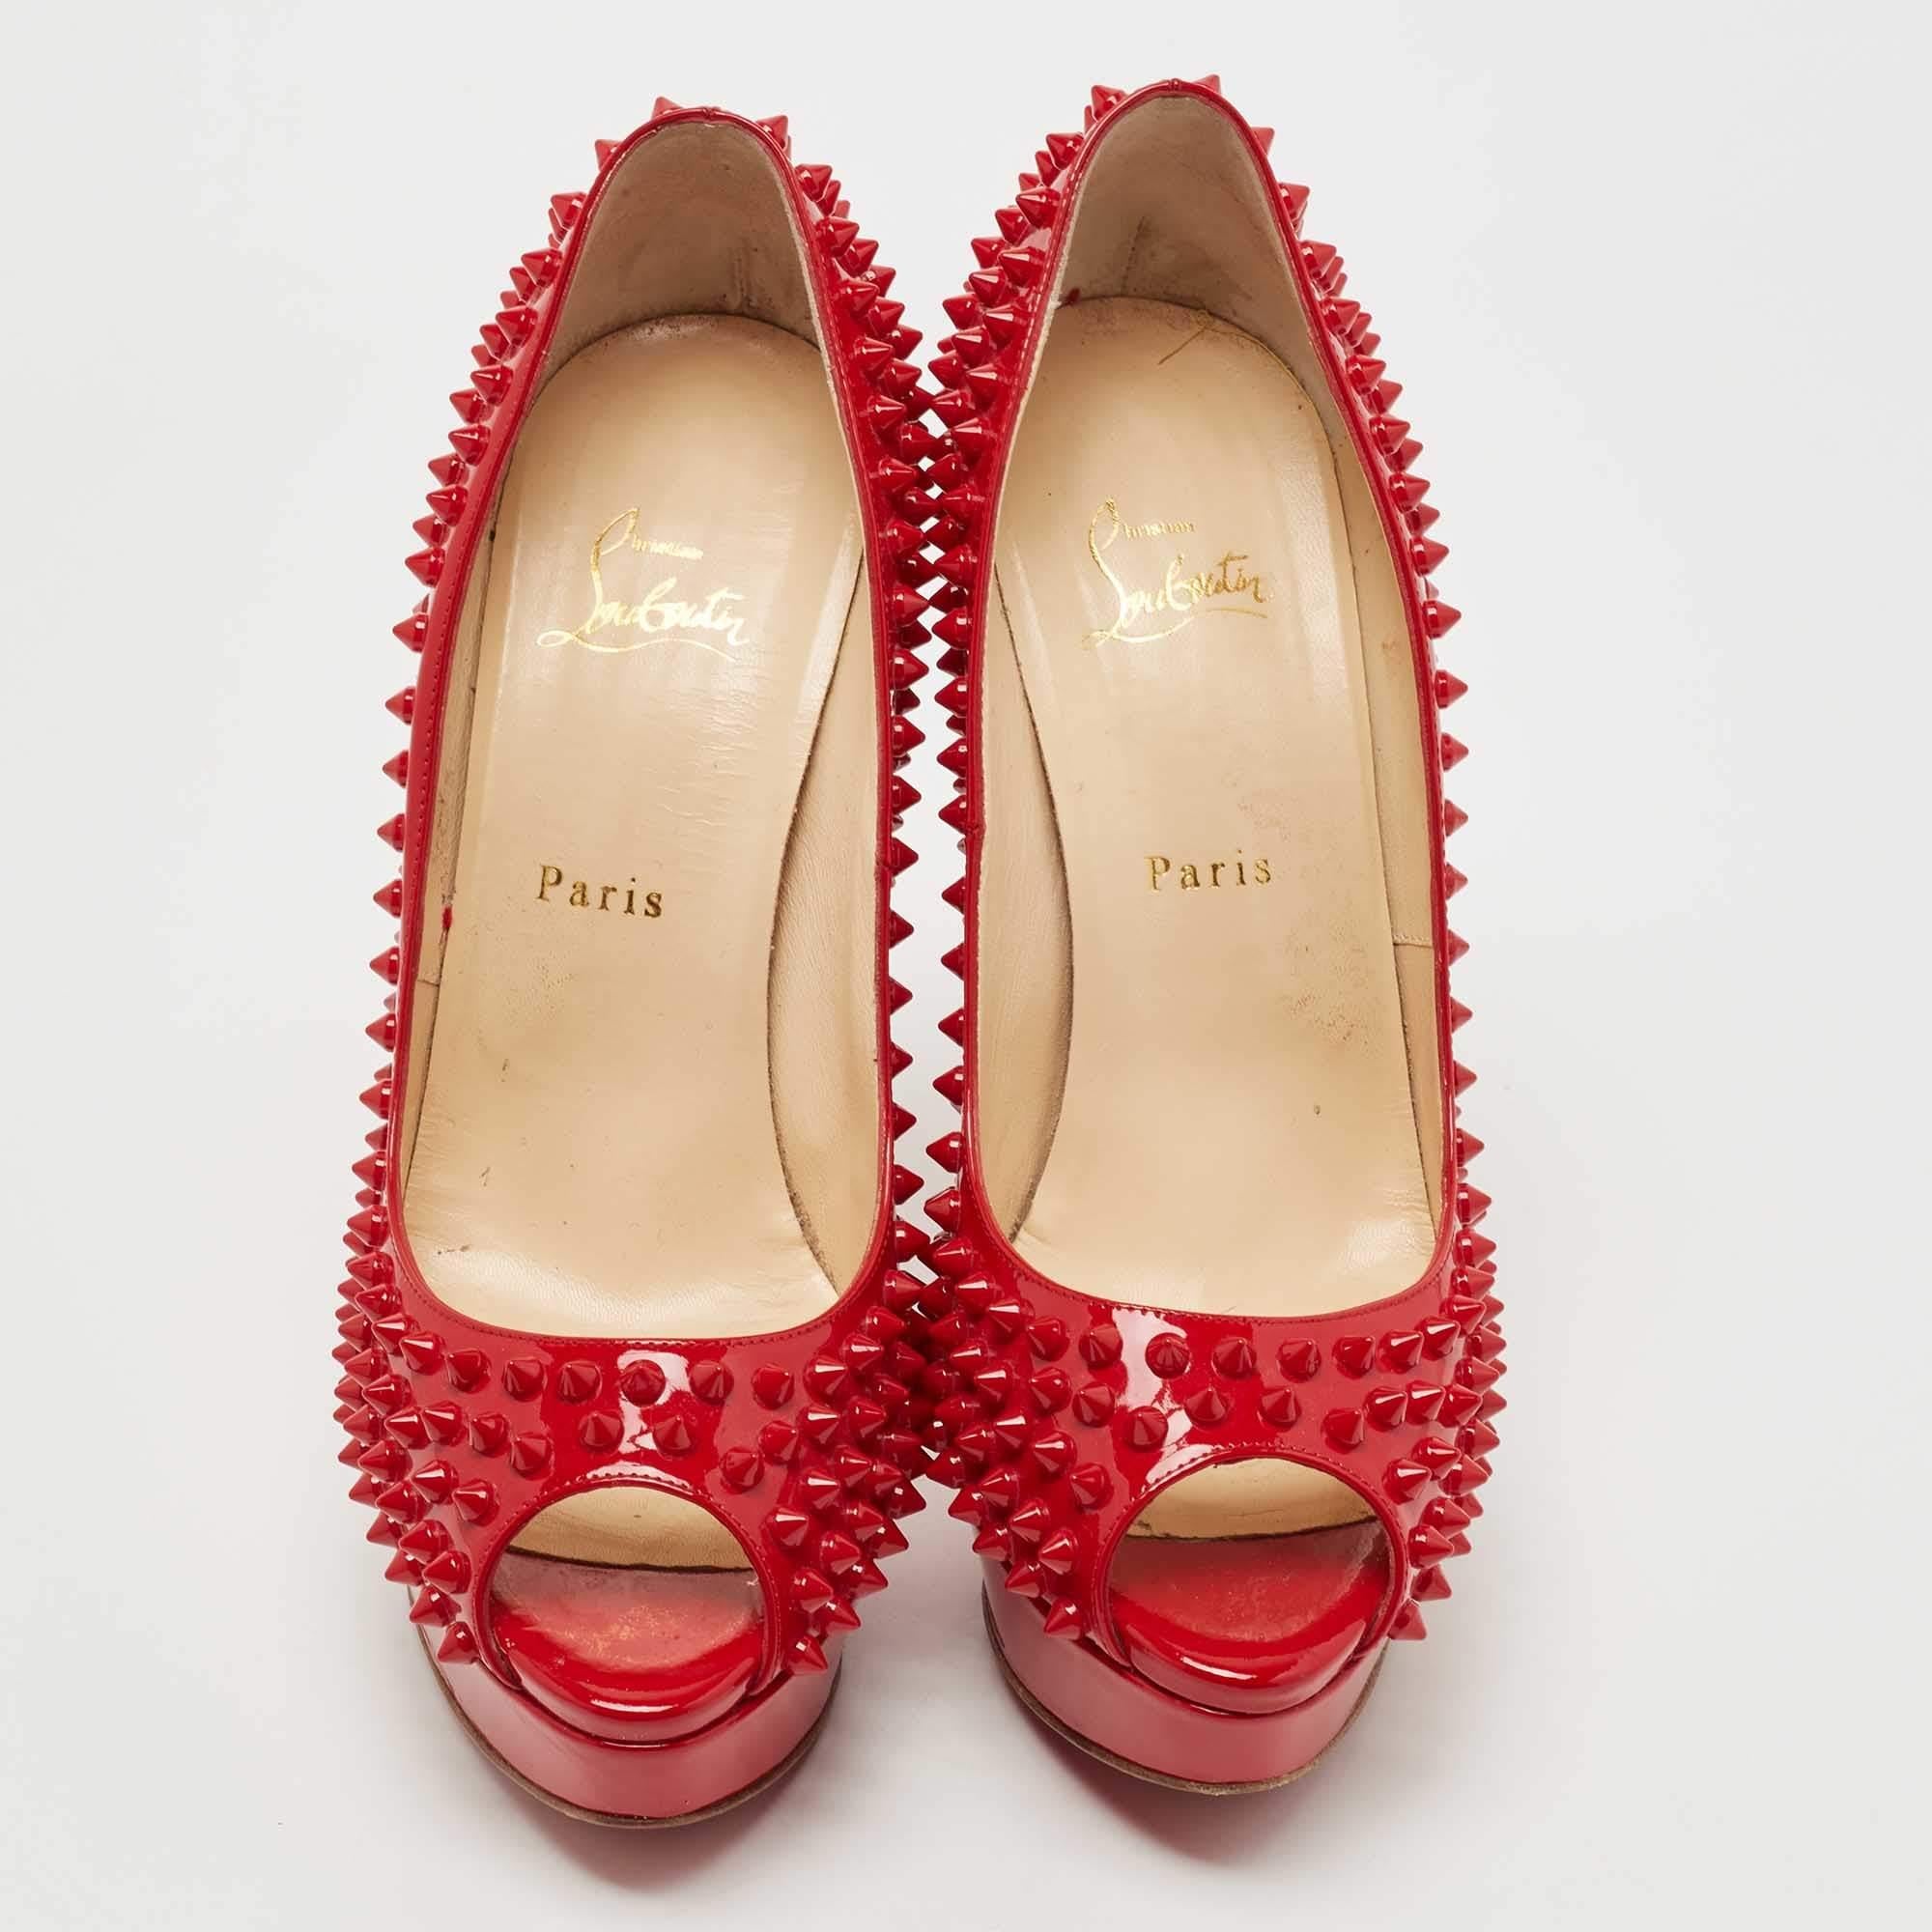 Stand out from the crowd with this pair of Christian Louboutin pumps that exude high fashion with class. Crafted from patent leather, this is a creation from their Lady Peep collection. It features a red shade shade with spike detailing and a glossy